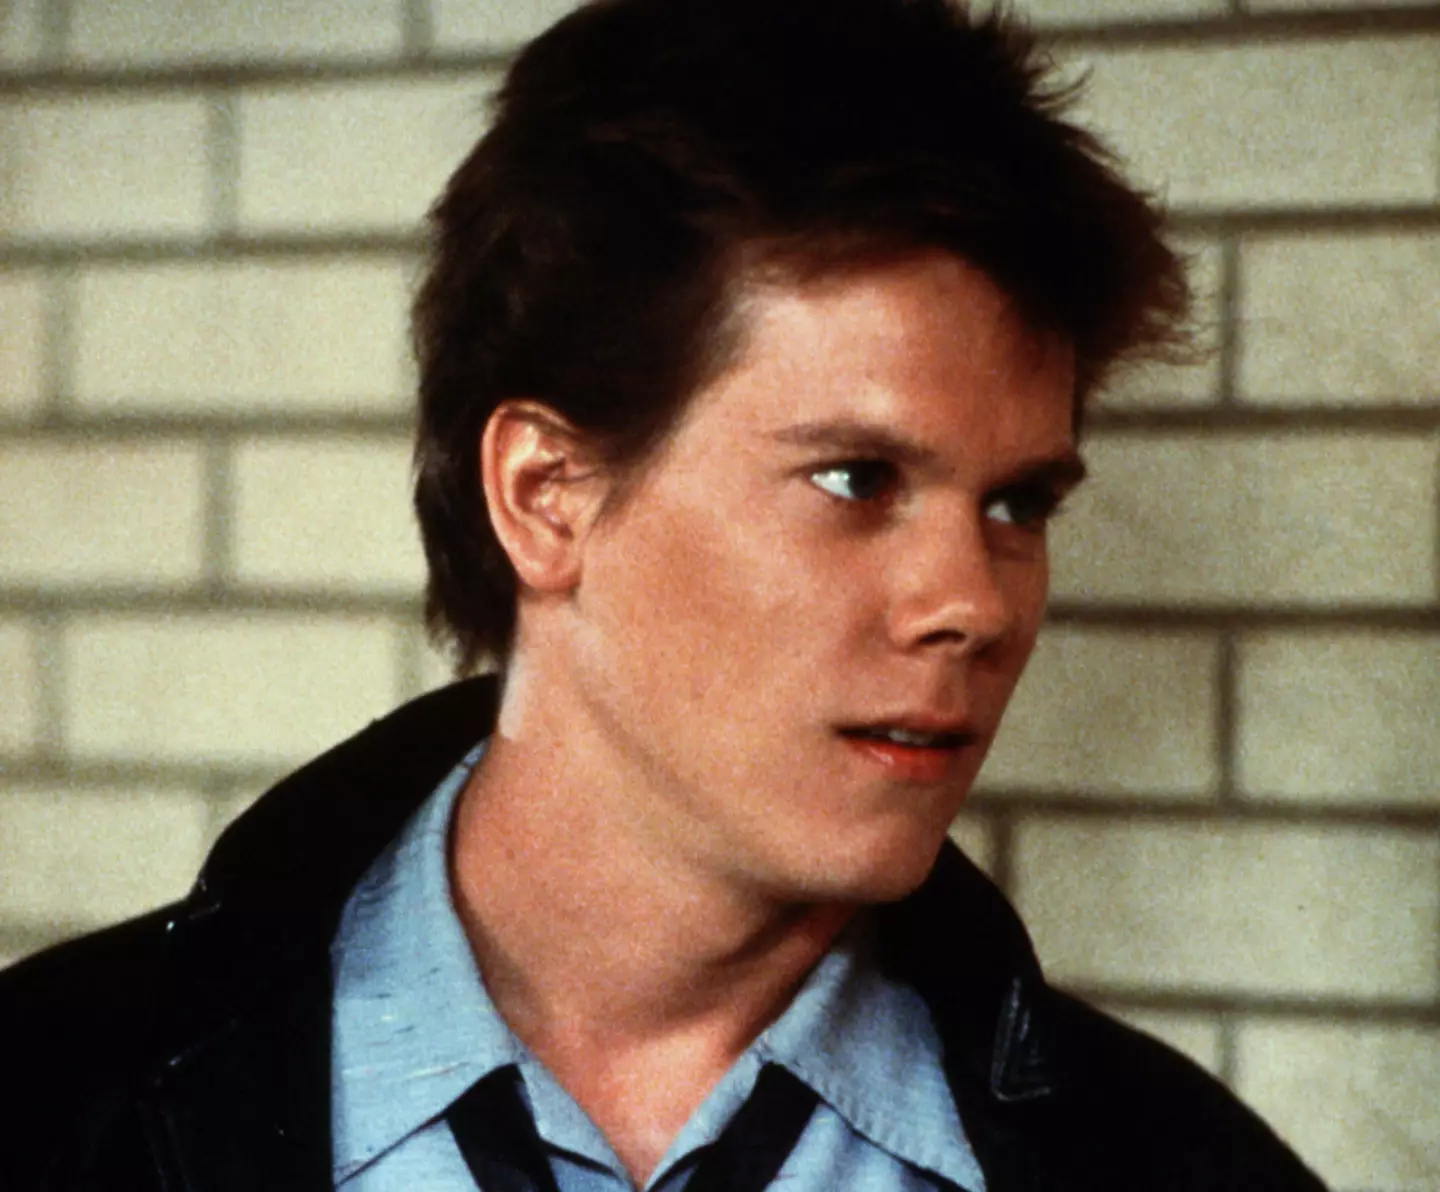 Kevin Bacon starred in Footloose in 1984.